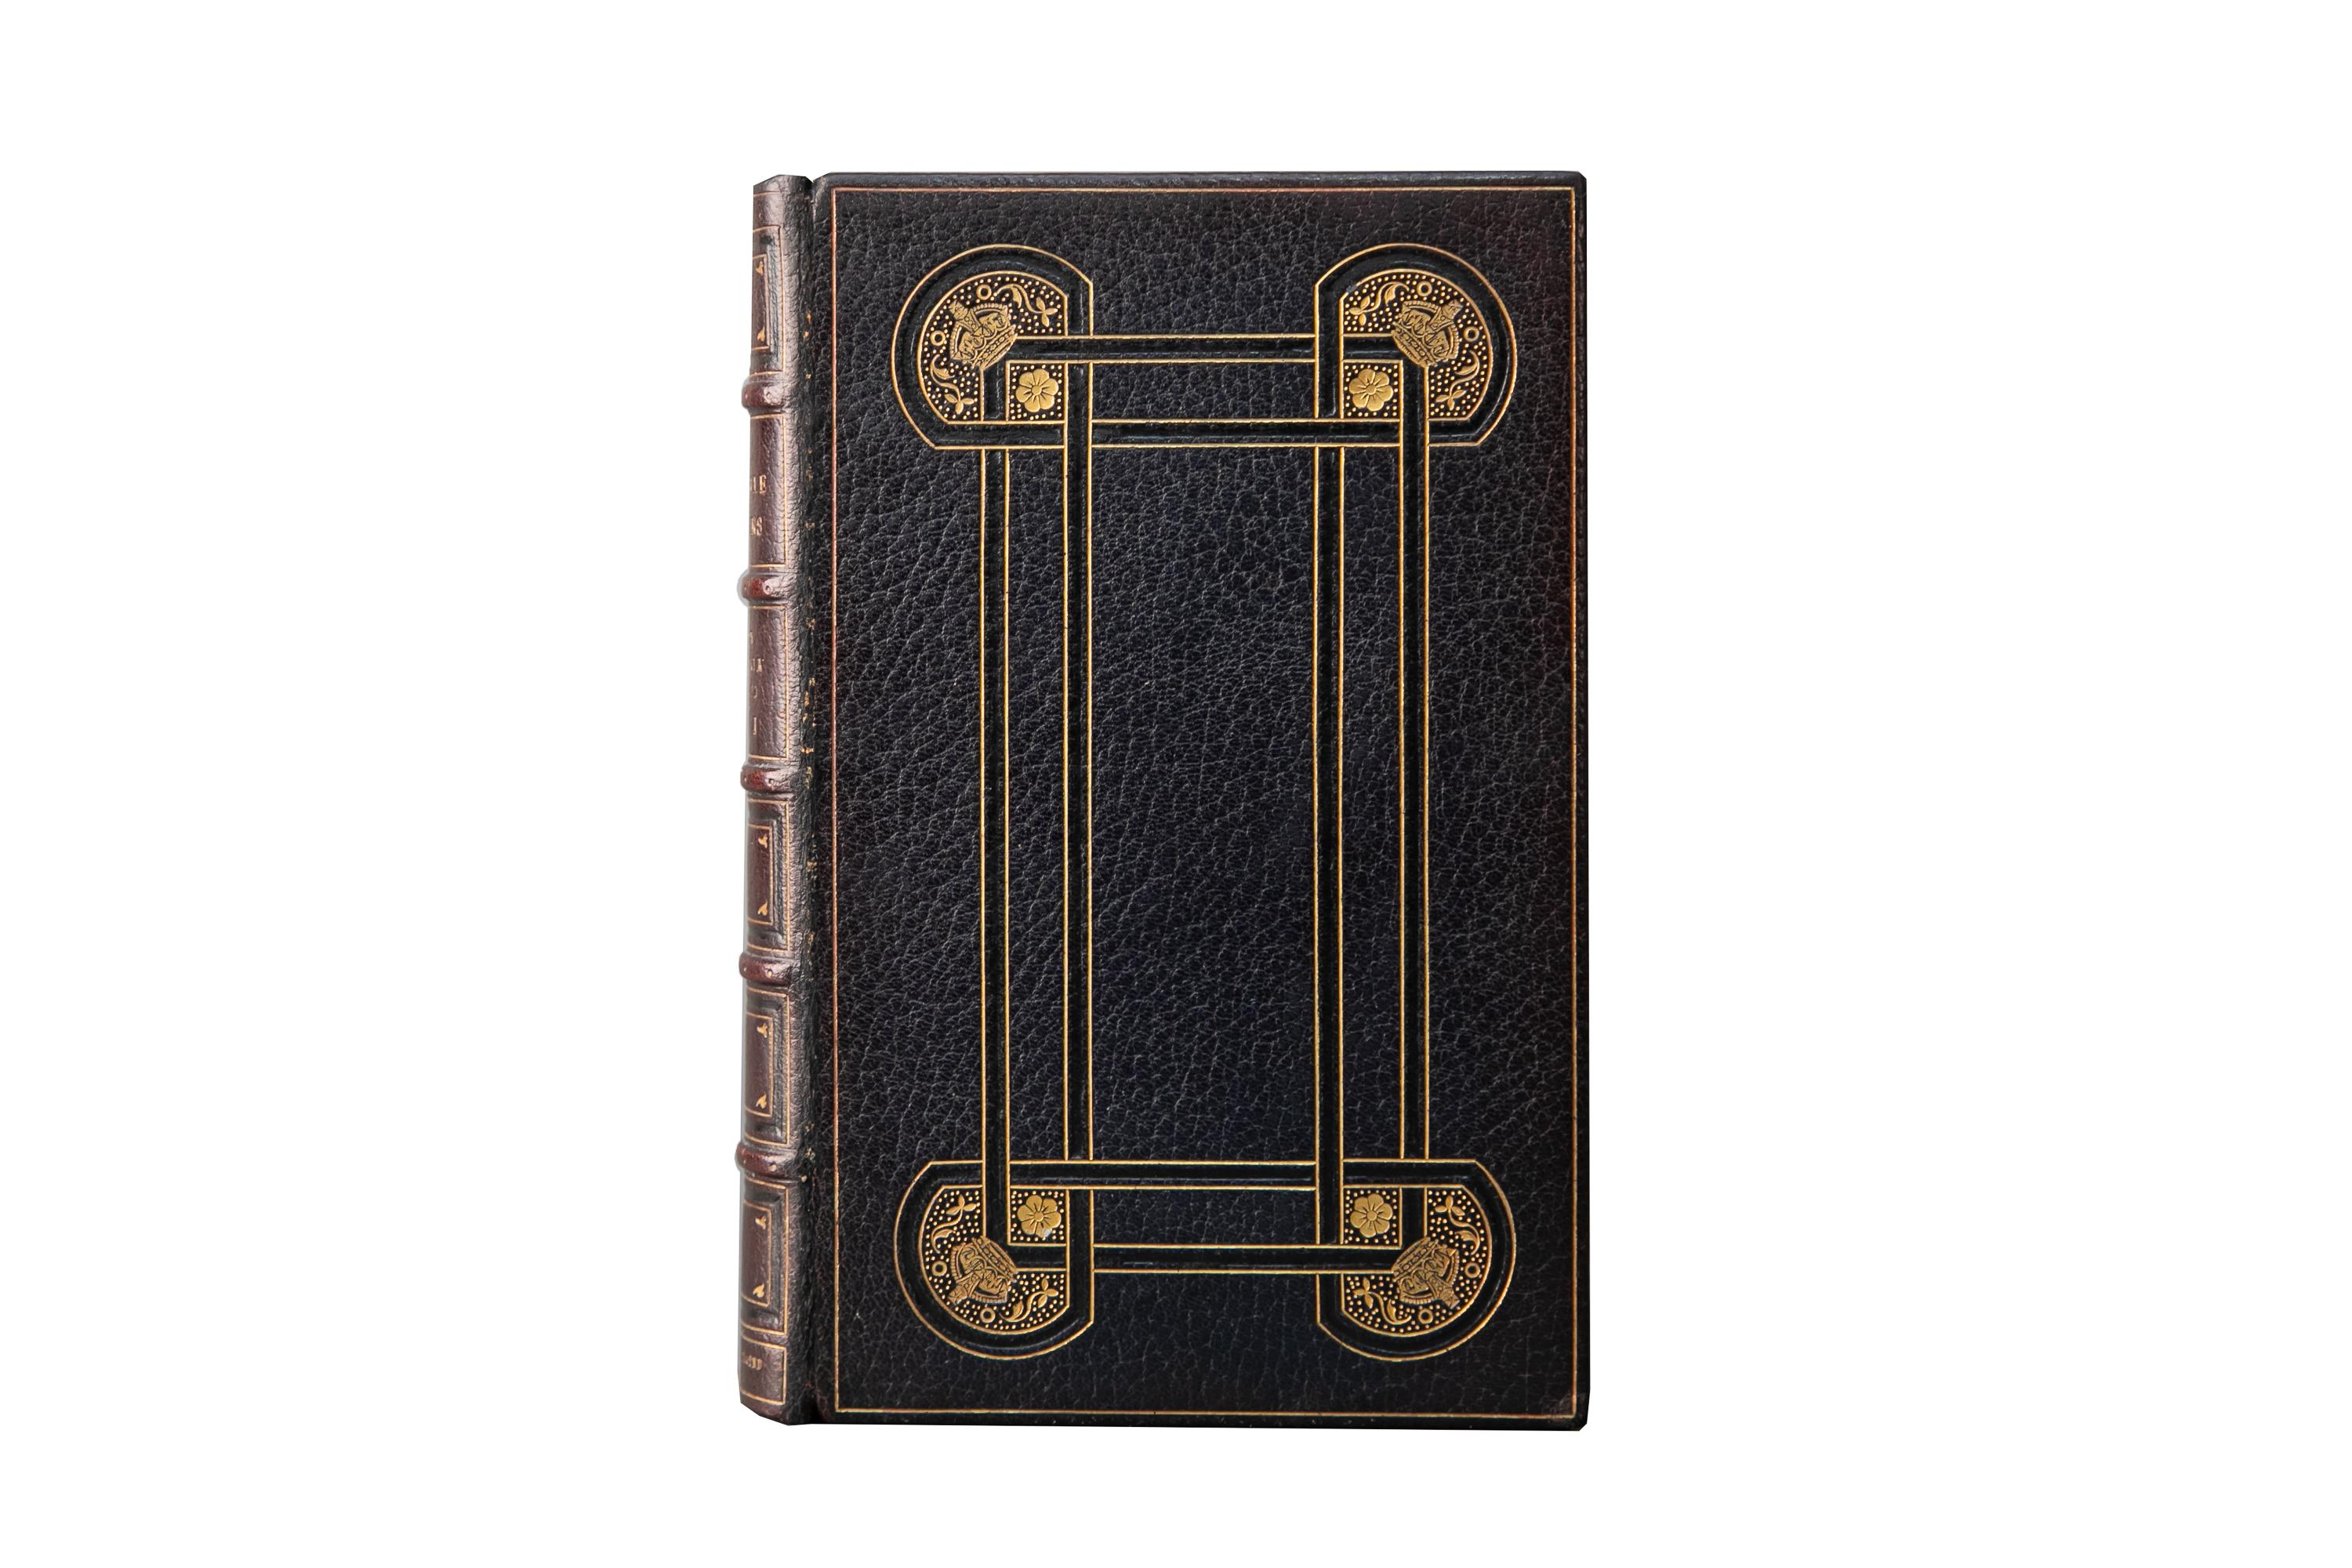 8 Volumes. Charles C.F. Greville, The Greville Memoirs. Bound by Bayntun in full navy morocco with the covers displaying gilt and open-tooling. The spines display raised bands, bordering, and label lettering, all gilt-tooled. all of the edges are